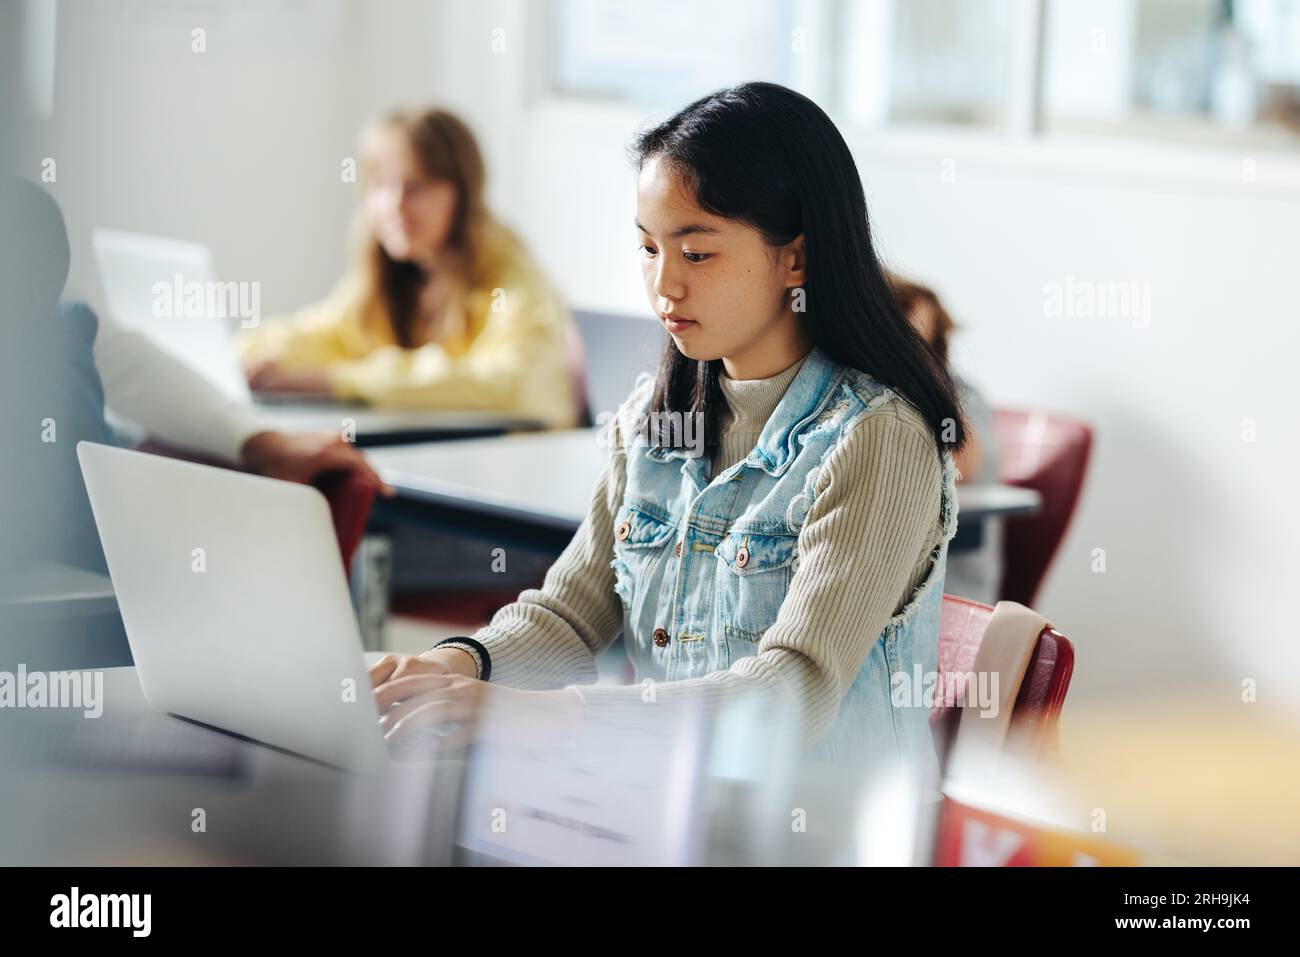 Digital literacy in action as a confident and capable elementary school girl takes part in a coding class using a laptop. Female student developing a Stock Photo